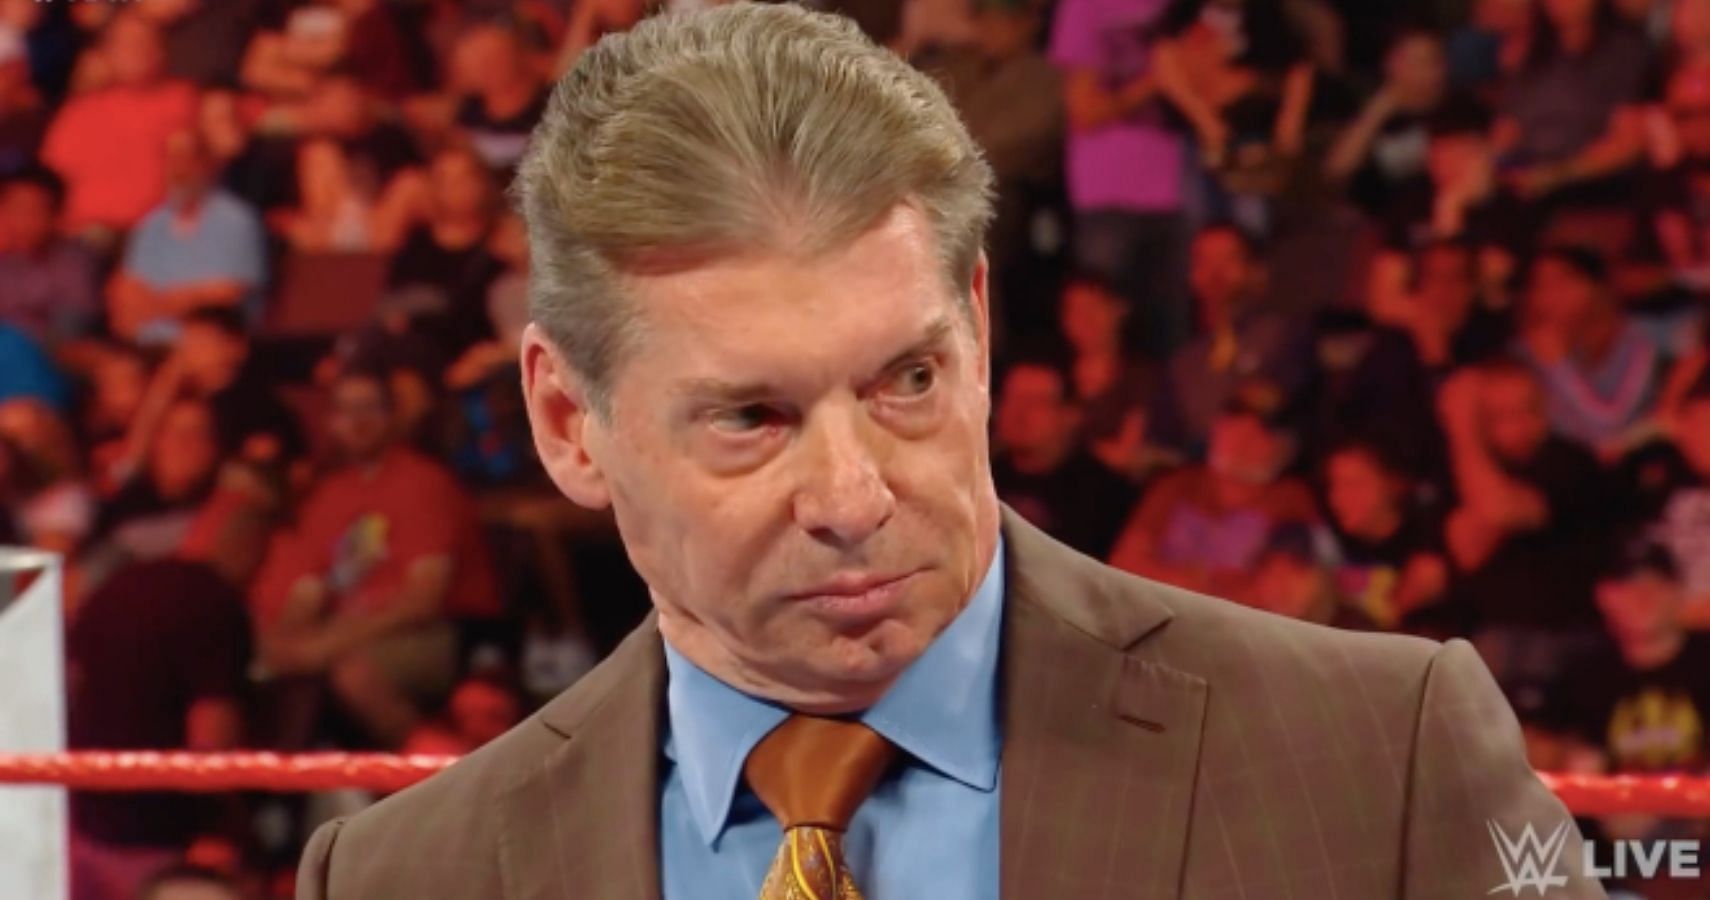 Vince McMahon bought WCW in early 2001